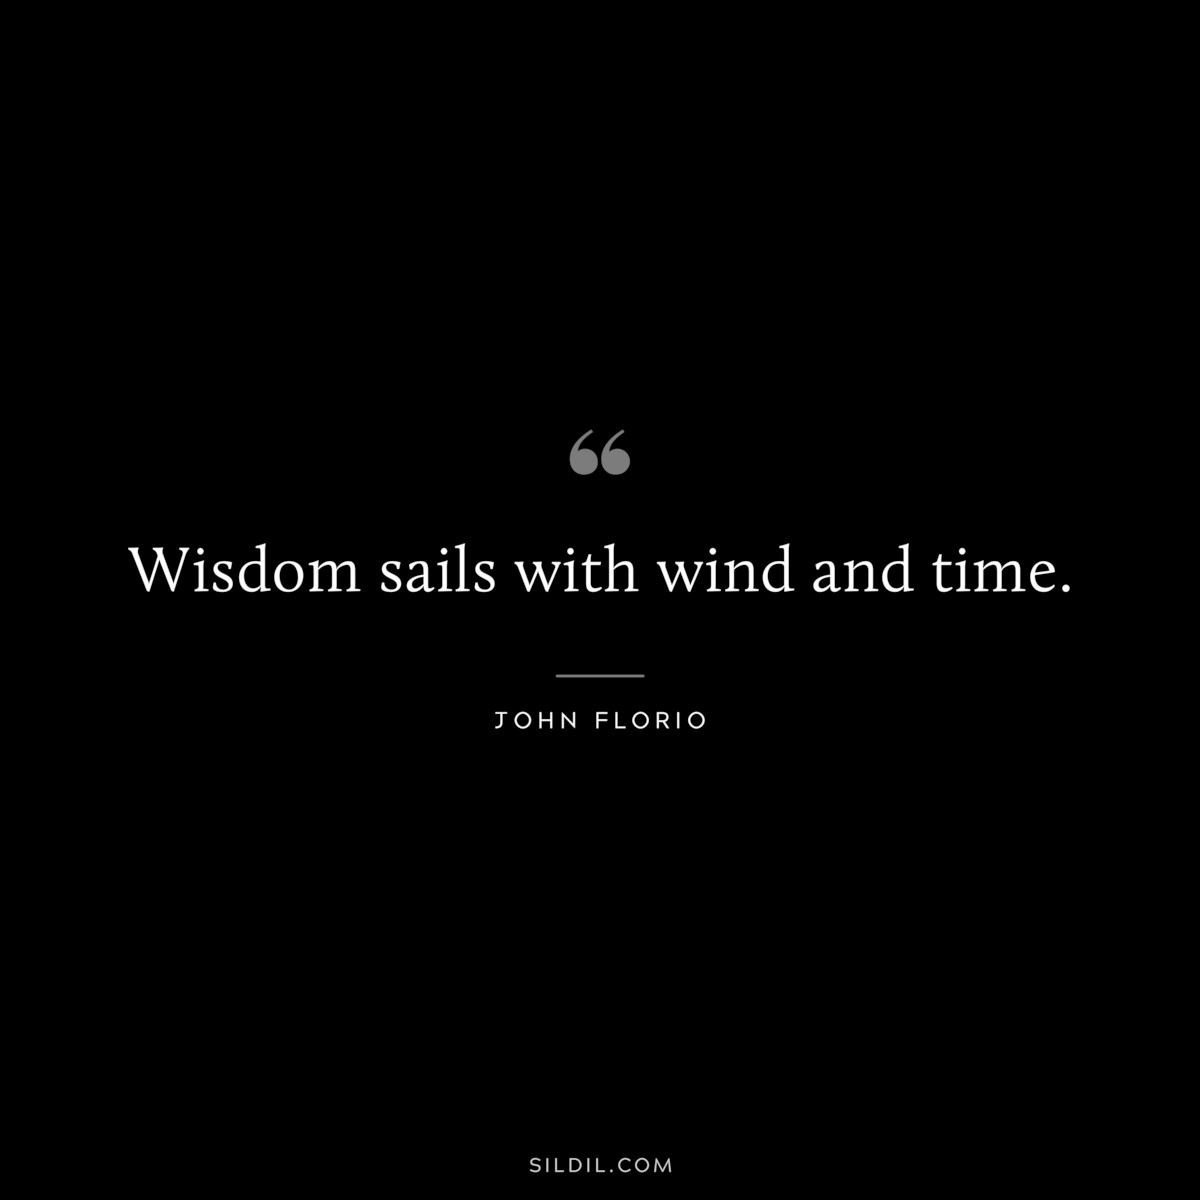 Wisdom sails with wind and time. ― John Florio